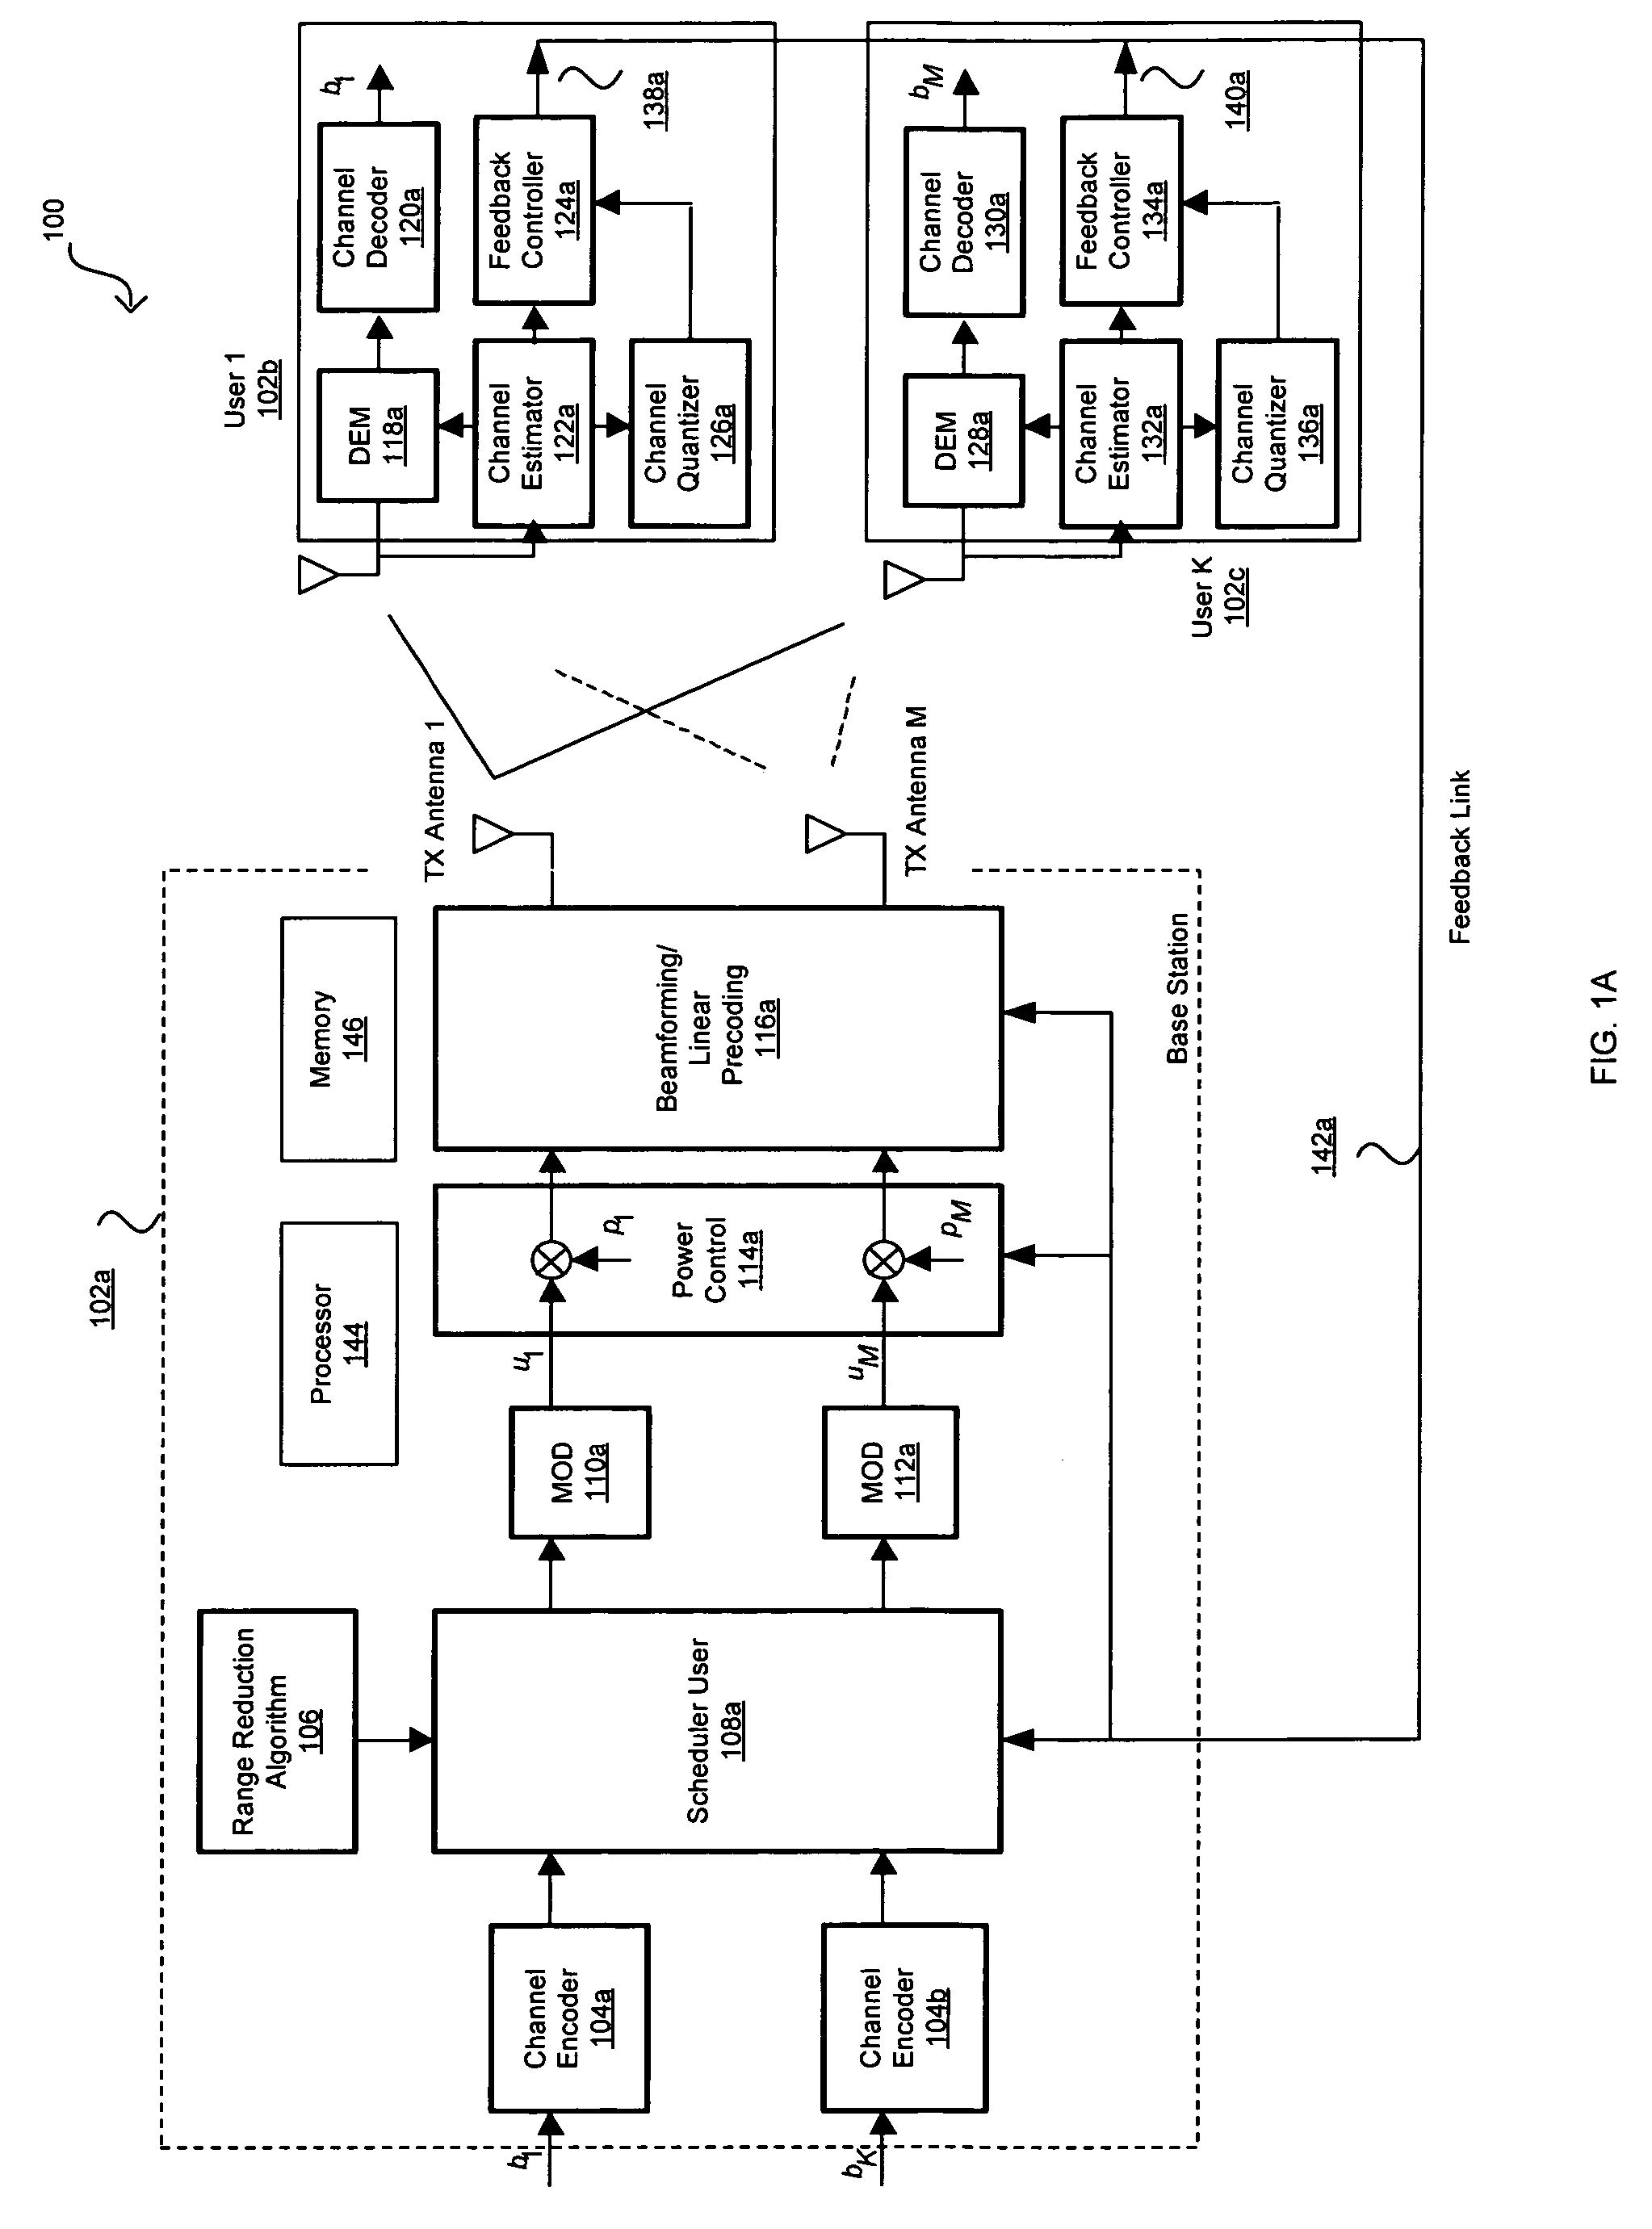 Method and system for greedy user group selection with range reduction for FDD multiuser MIMO downlink transmission with finite-rate channel state information feedback